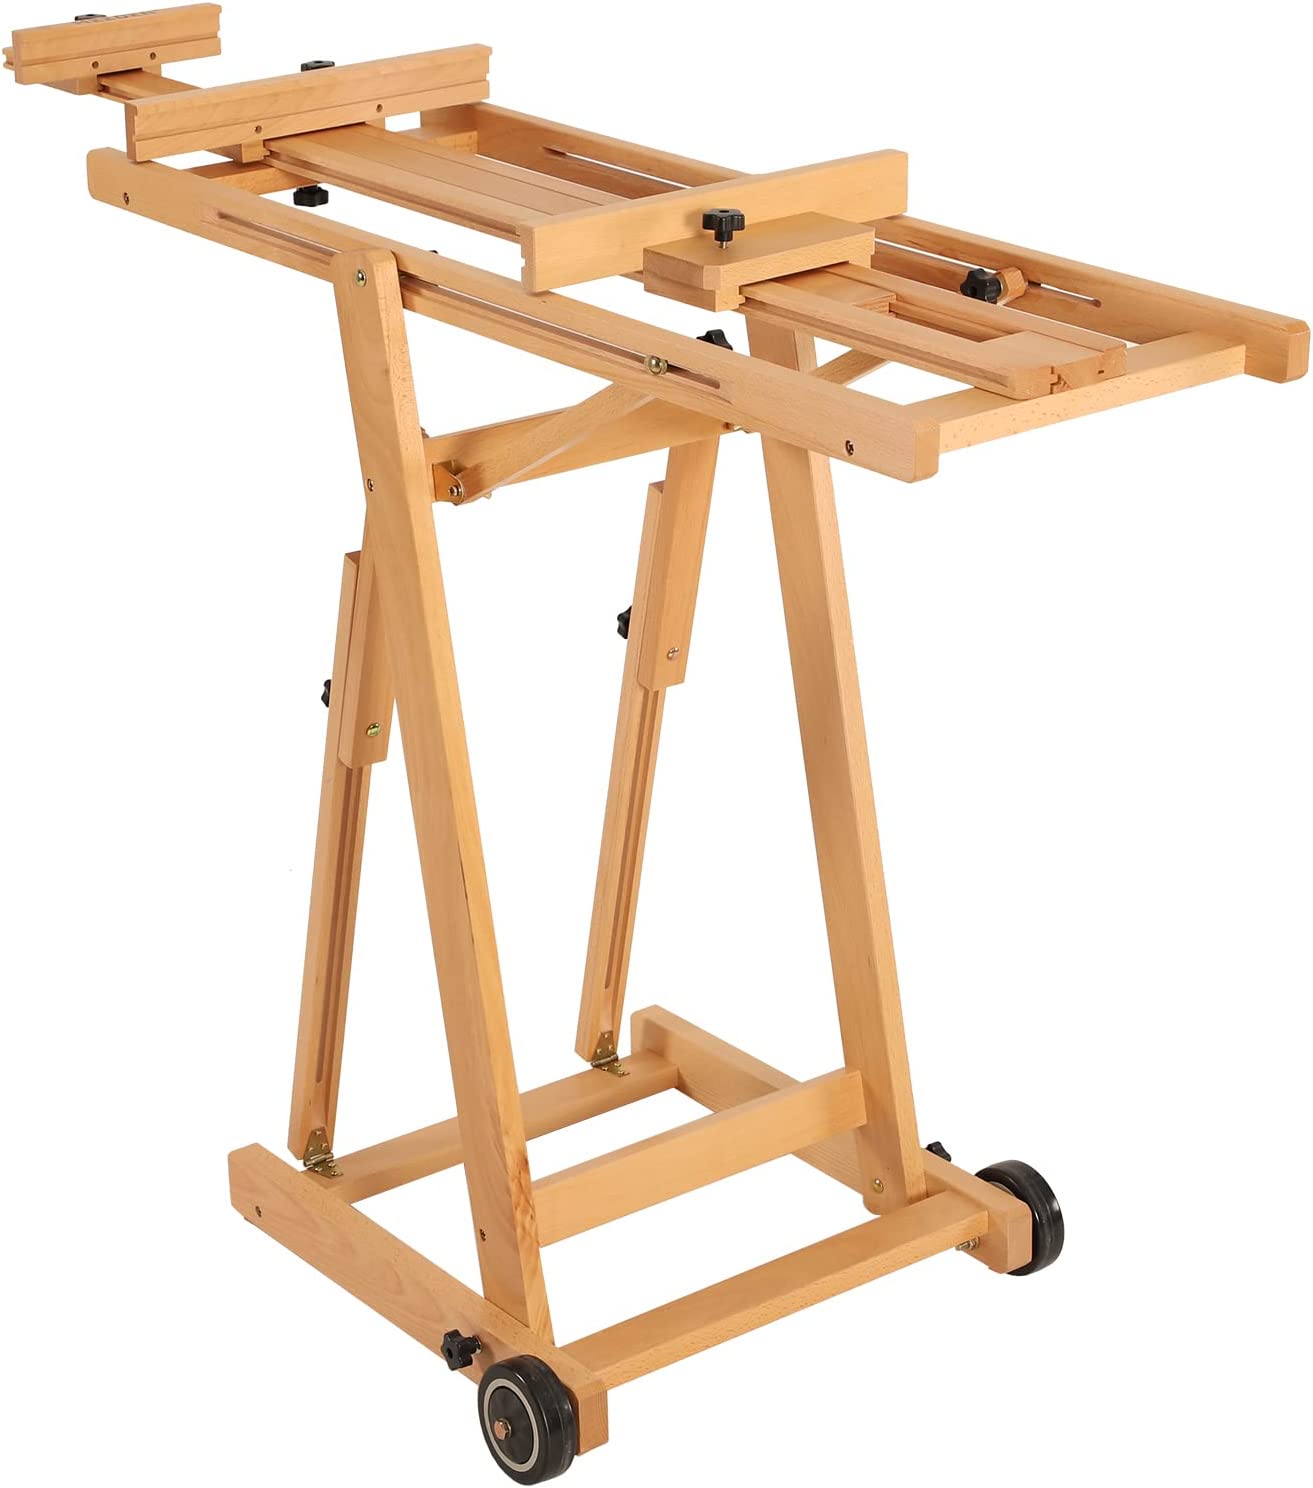 MEEDEN Large H-Frame Studio Easel, Wooden Art Easel with Wheels, Studio Artist Easel for Painting, Movable and Tilting Flat Available, Holds Canvas Up